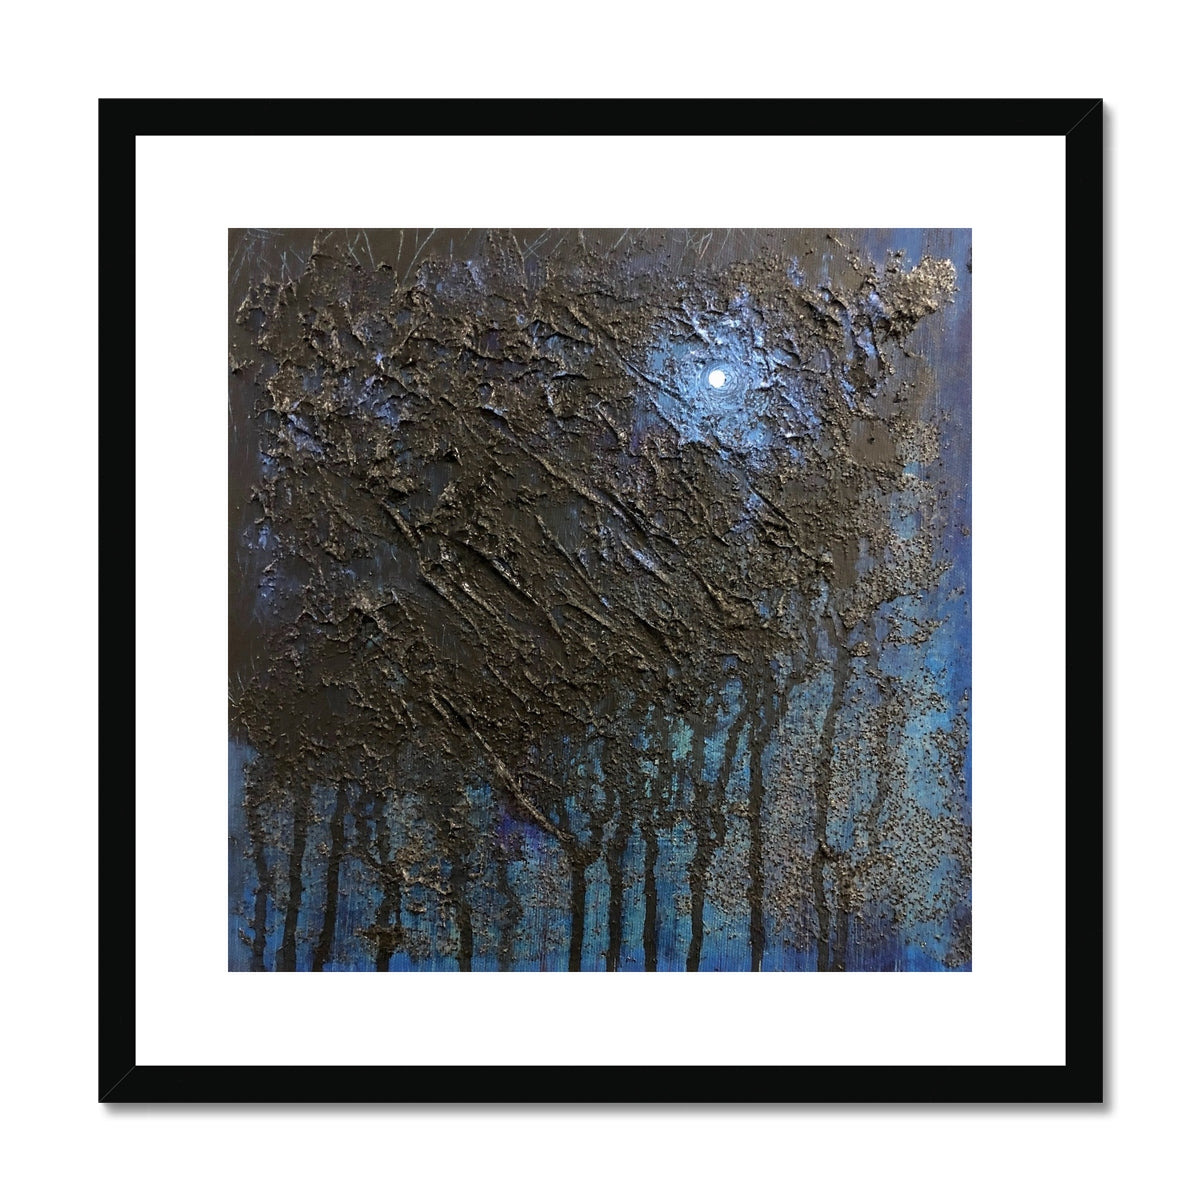 The Blue Moon Wood Abstract Painting | Framed & Mounted Prints From Scotland-Framed & Mounted Prints-Abstract & Impressionistic Art Gallery-20"x20"-Black Frame-Paintings, Prints, Homeware, Art Gifts From Scotland By Scottish Artist Kevin Hunter